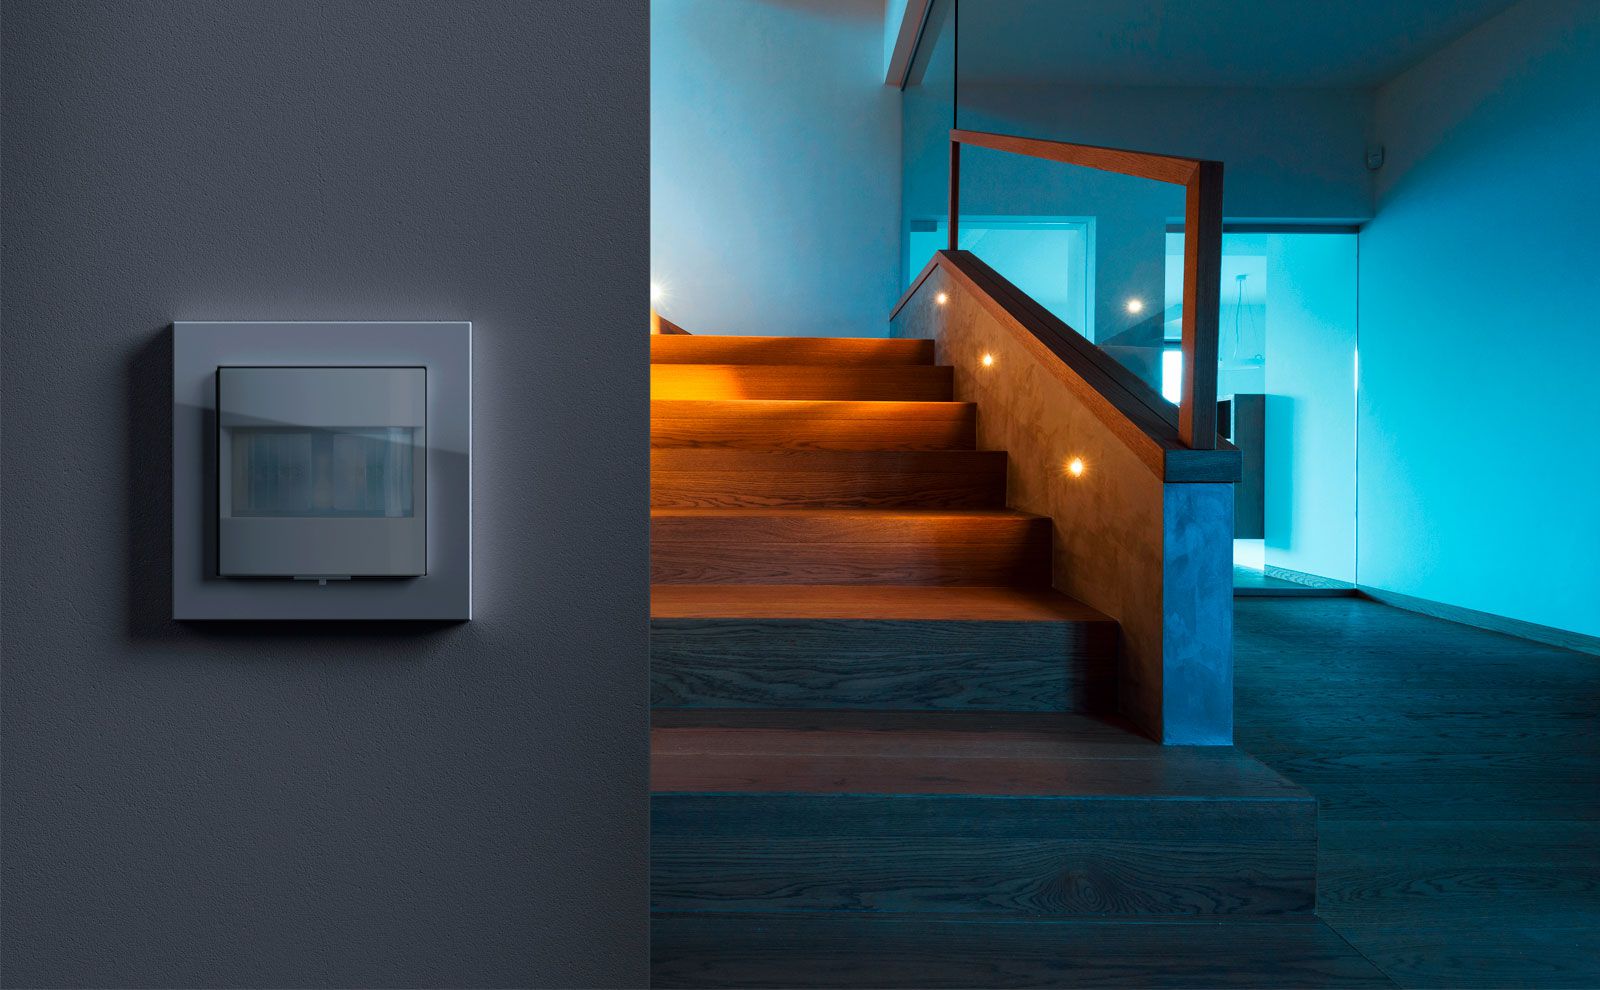 Forgot to turn off the light? No problem thanks to the motion detector. ✓Reacts to motion ✓Energy saving ✓Award-winning design